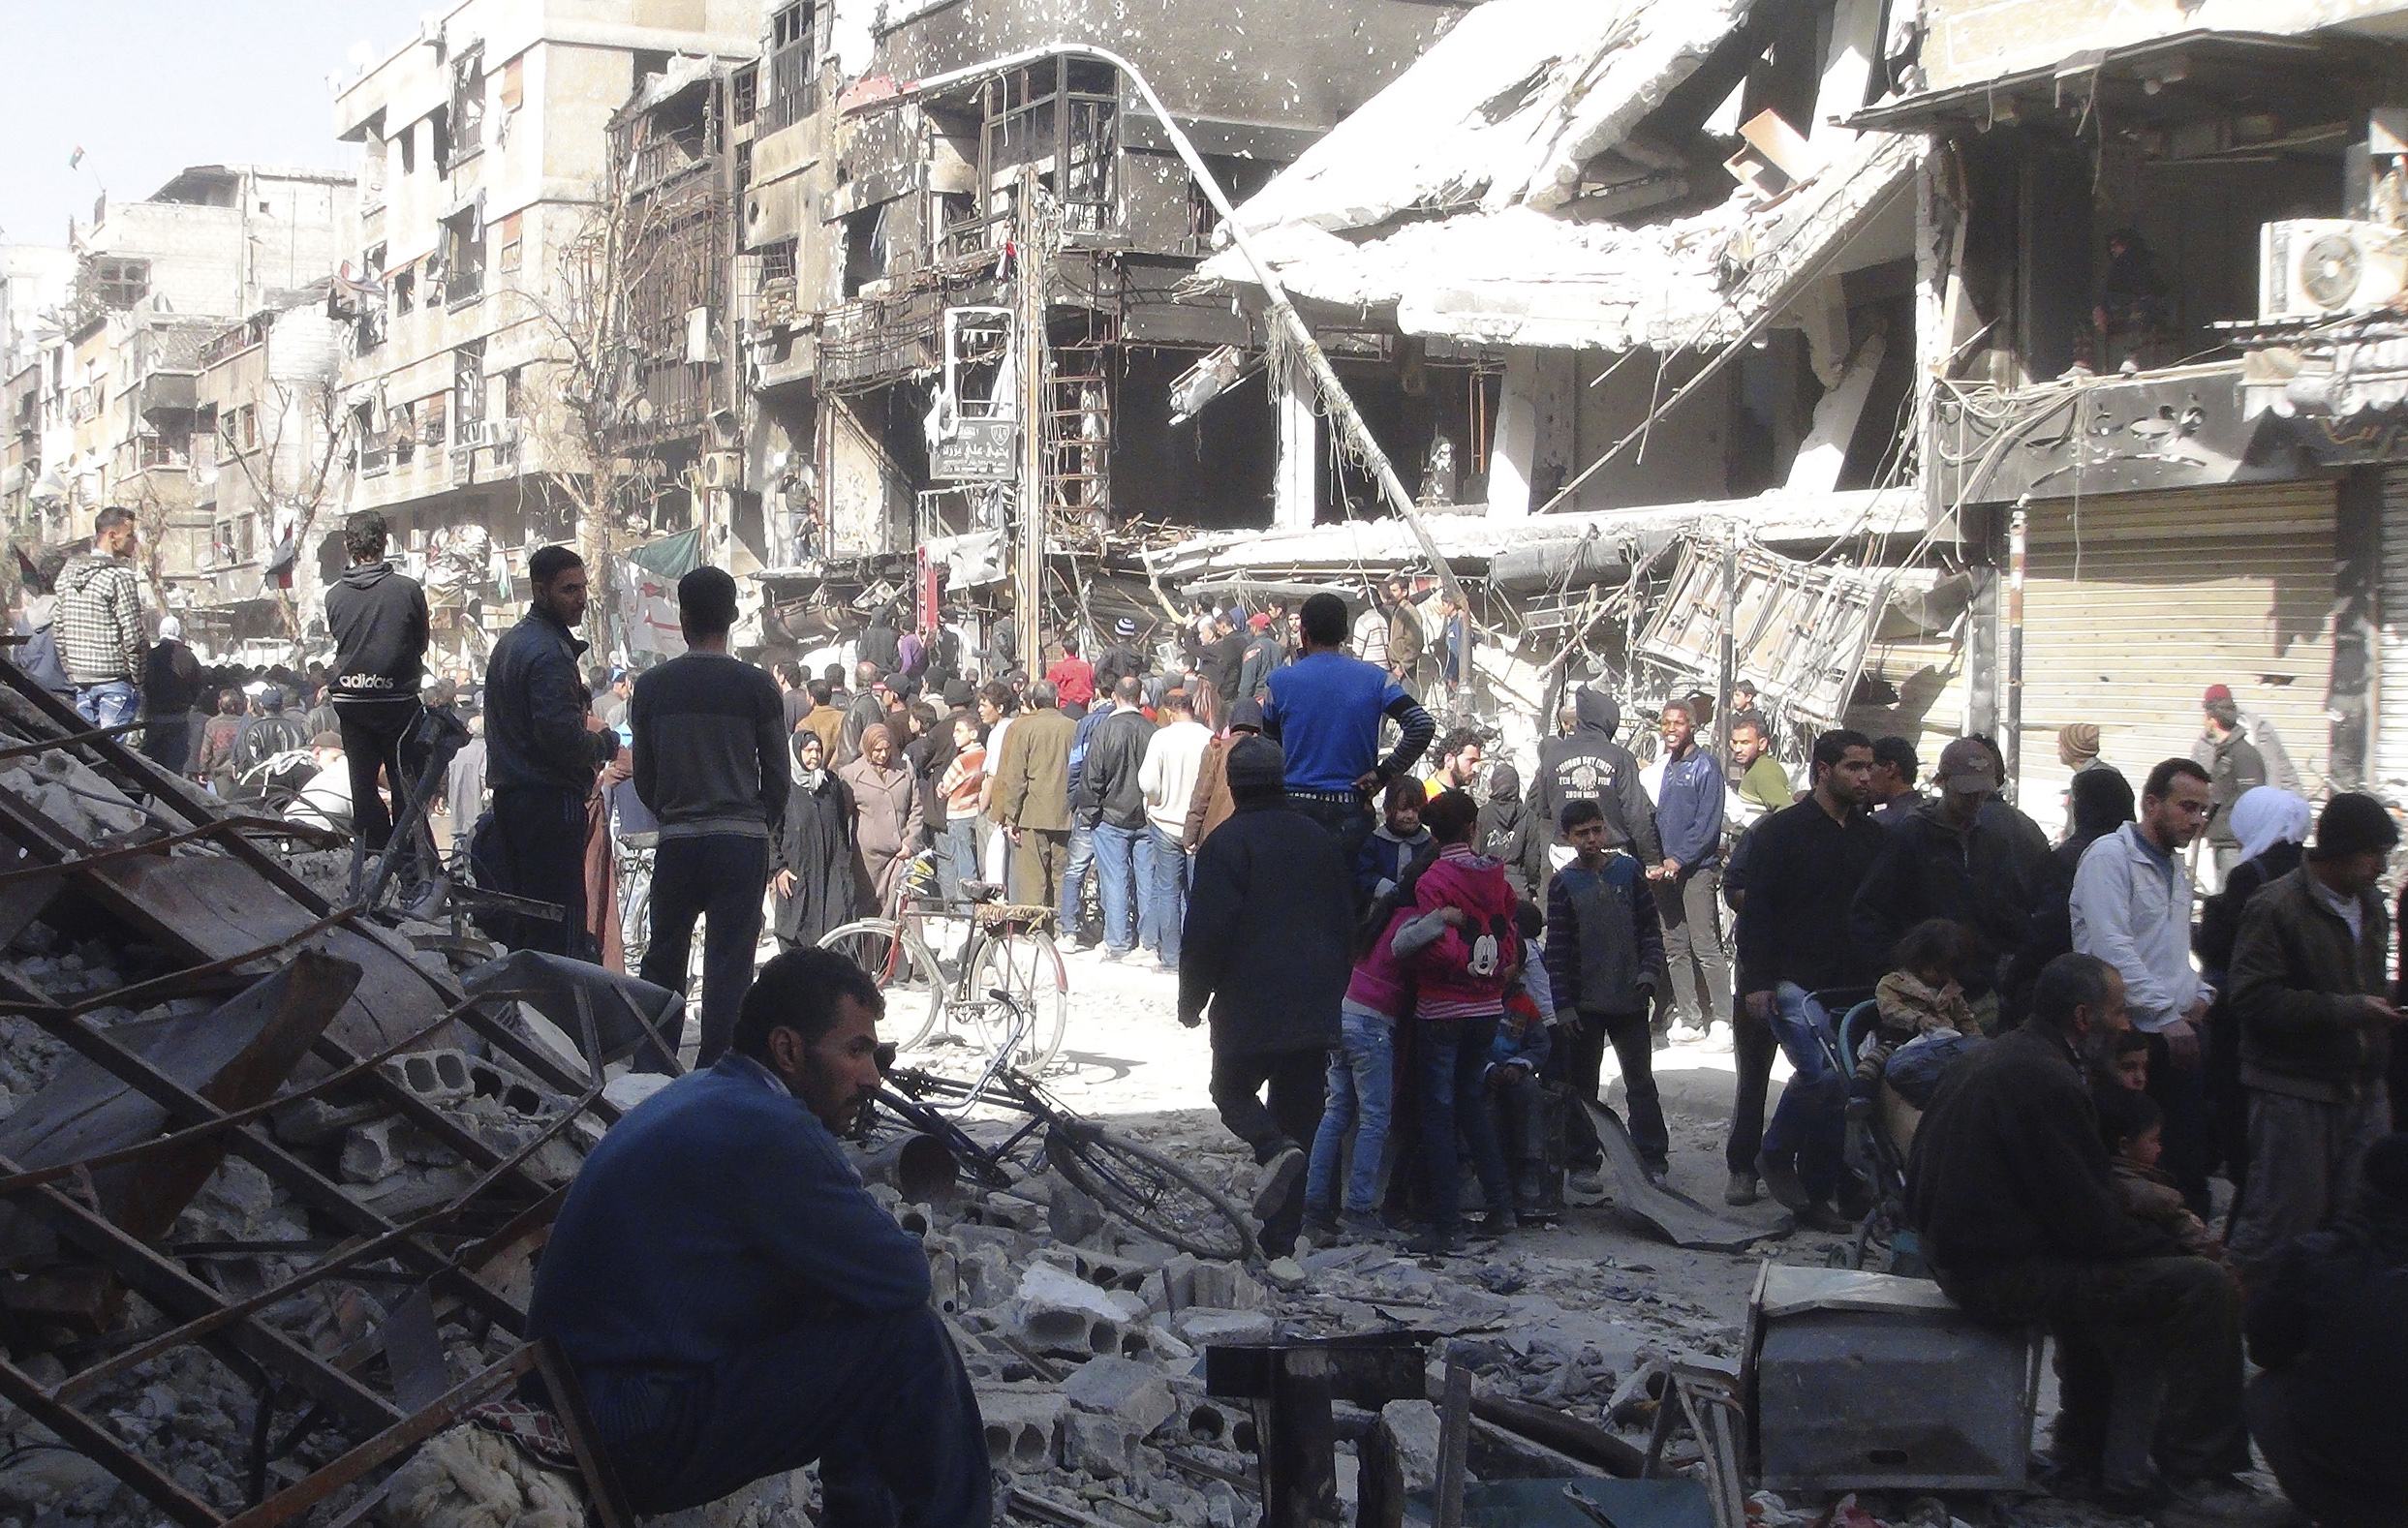 Humanitarian Campaign Launched in Solidarity with Vulnerable Families in Yarmouk Camp